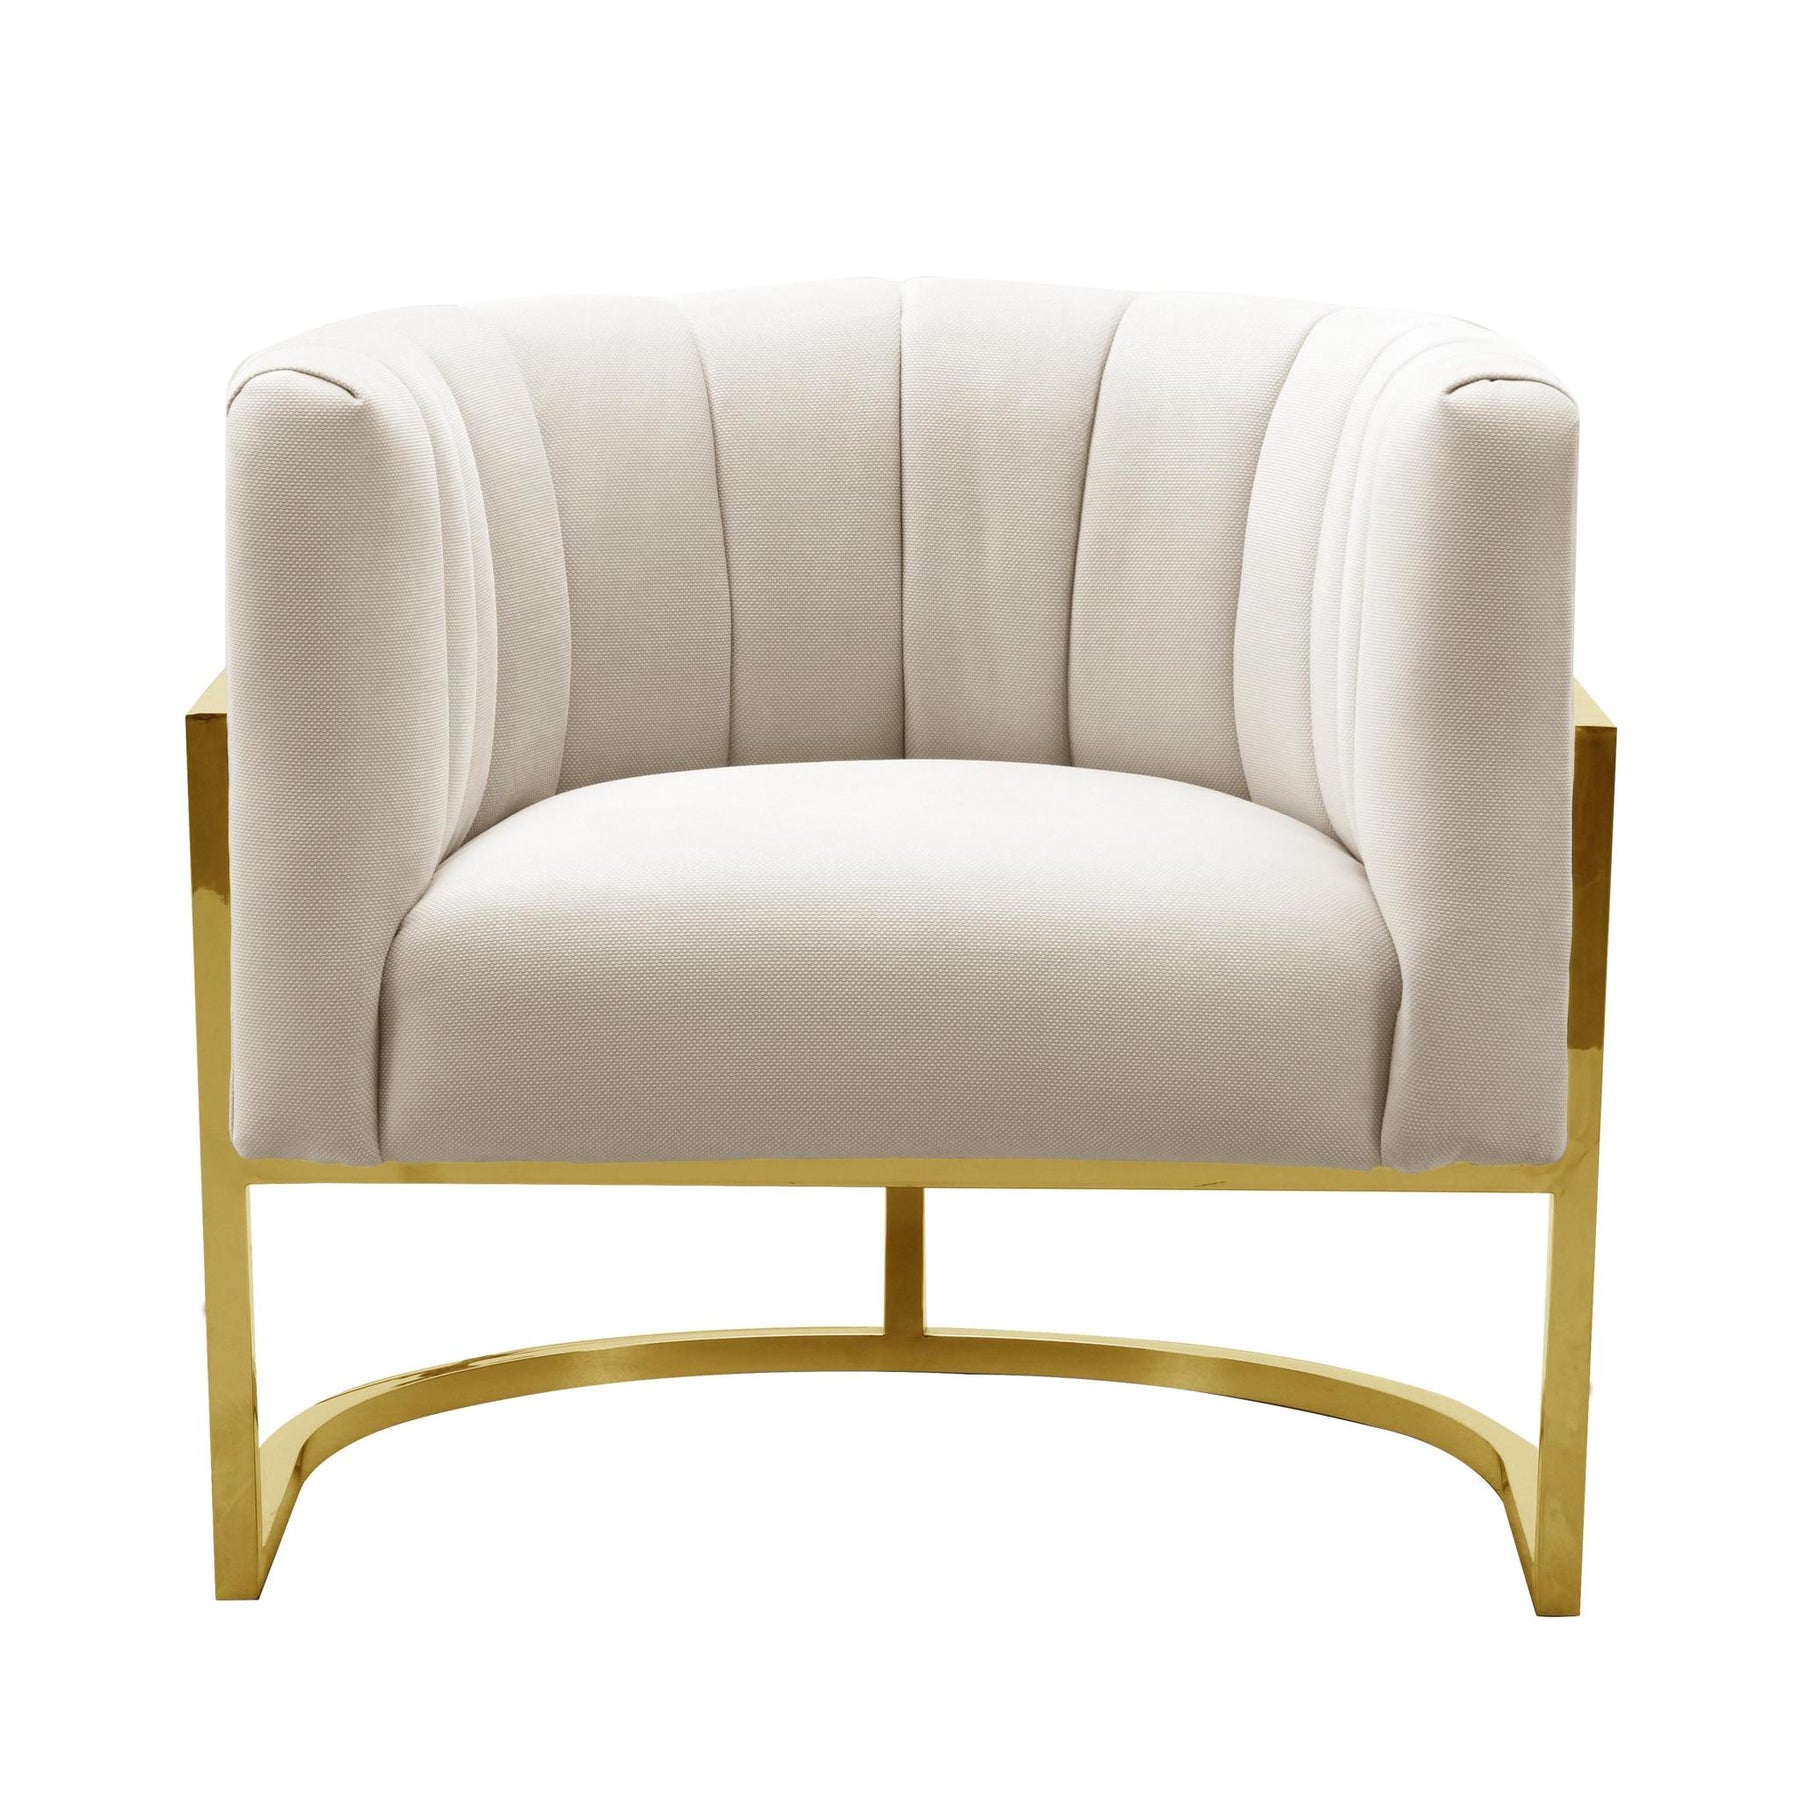 TOV Furniture Modern Magnolia Spotted Cream Chair with Gold - TOV-S6150